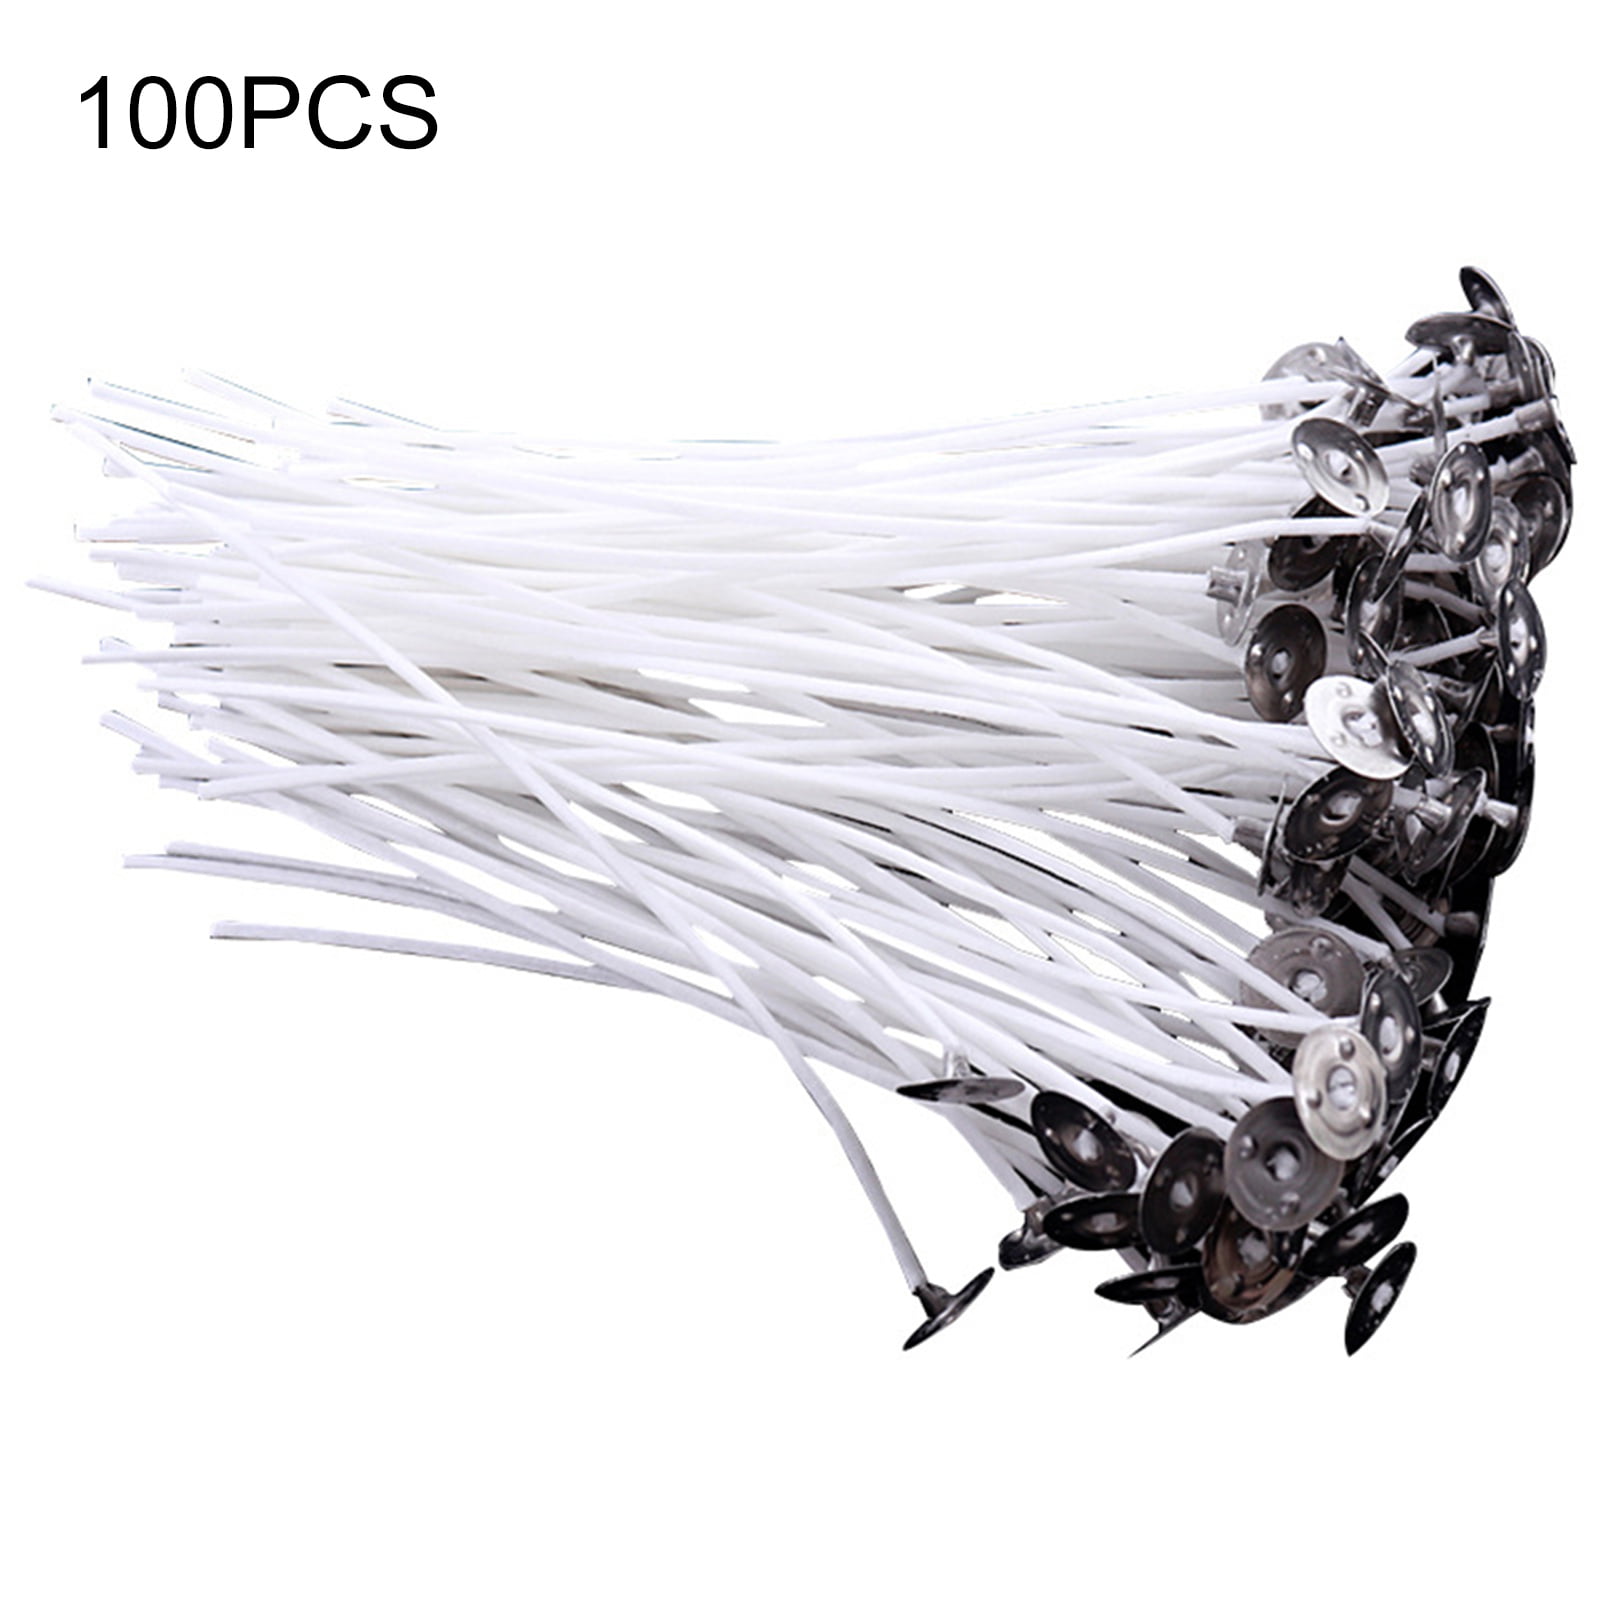 BG_ 100Pcs 12cm Candle Wicks Cotton Core Pre Waxed With Sustainers For Candle Ma 